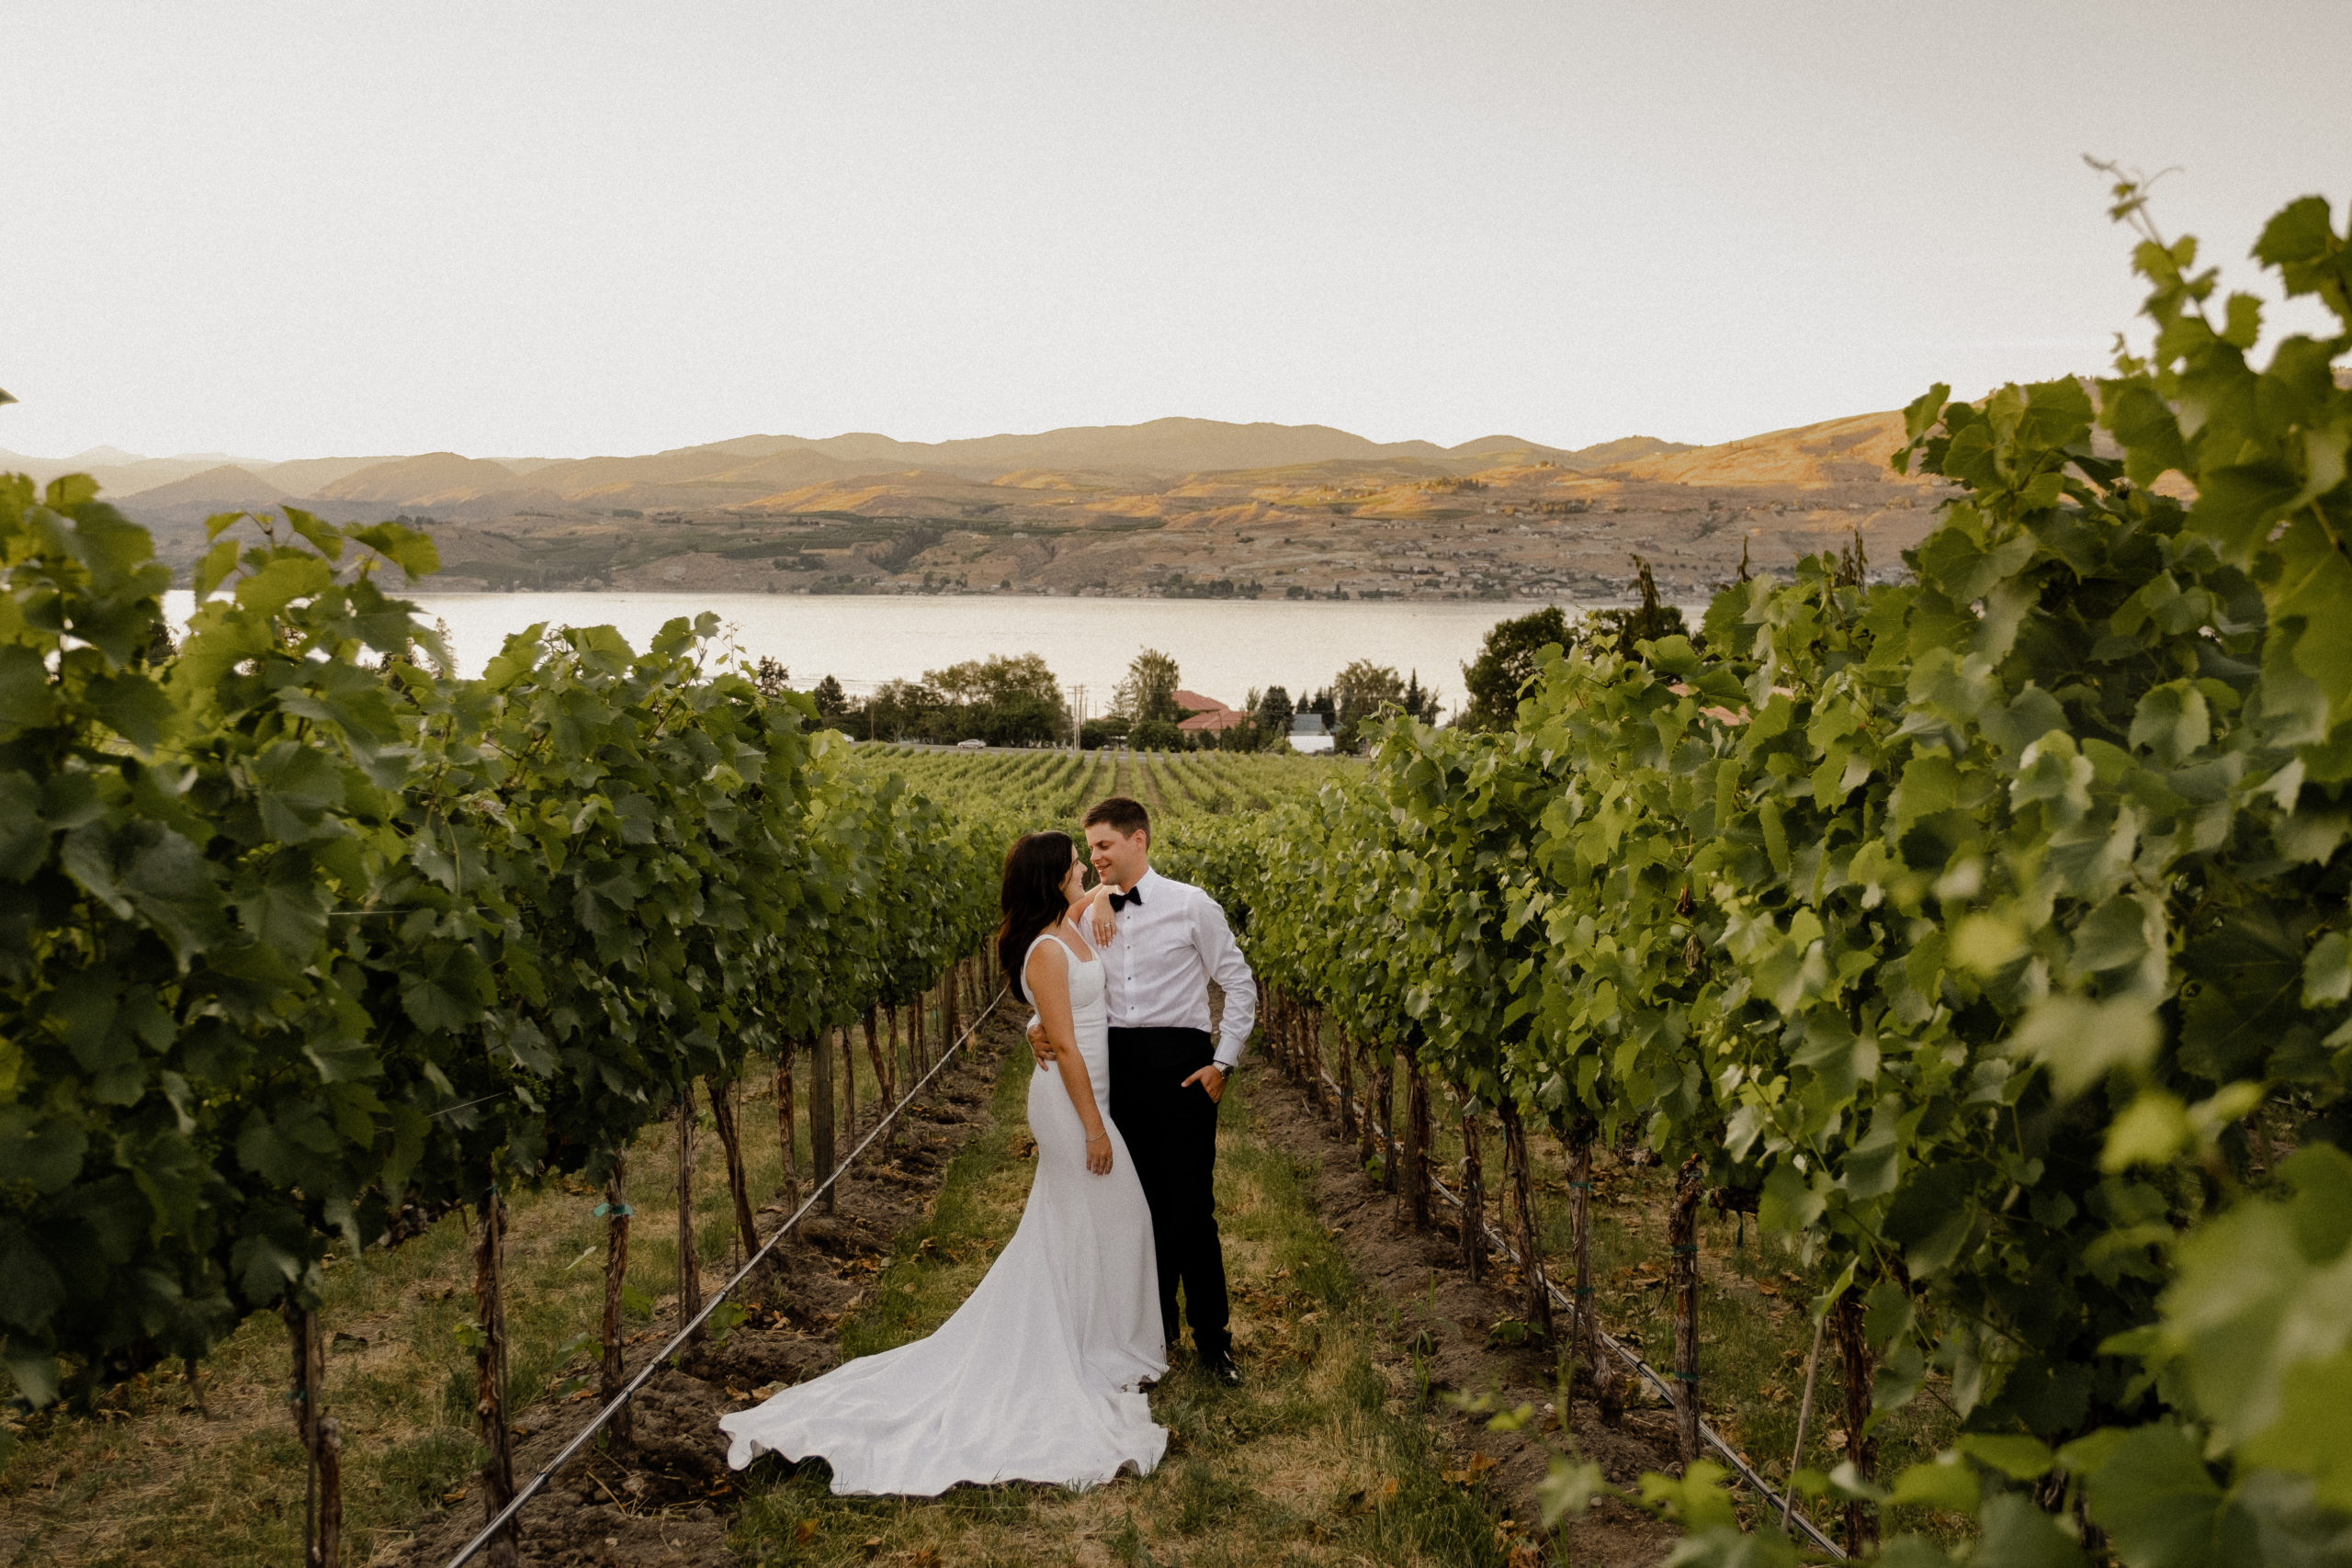 Wedding photography by Sarah Anne Photo covering hiring a videographer.